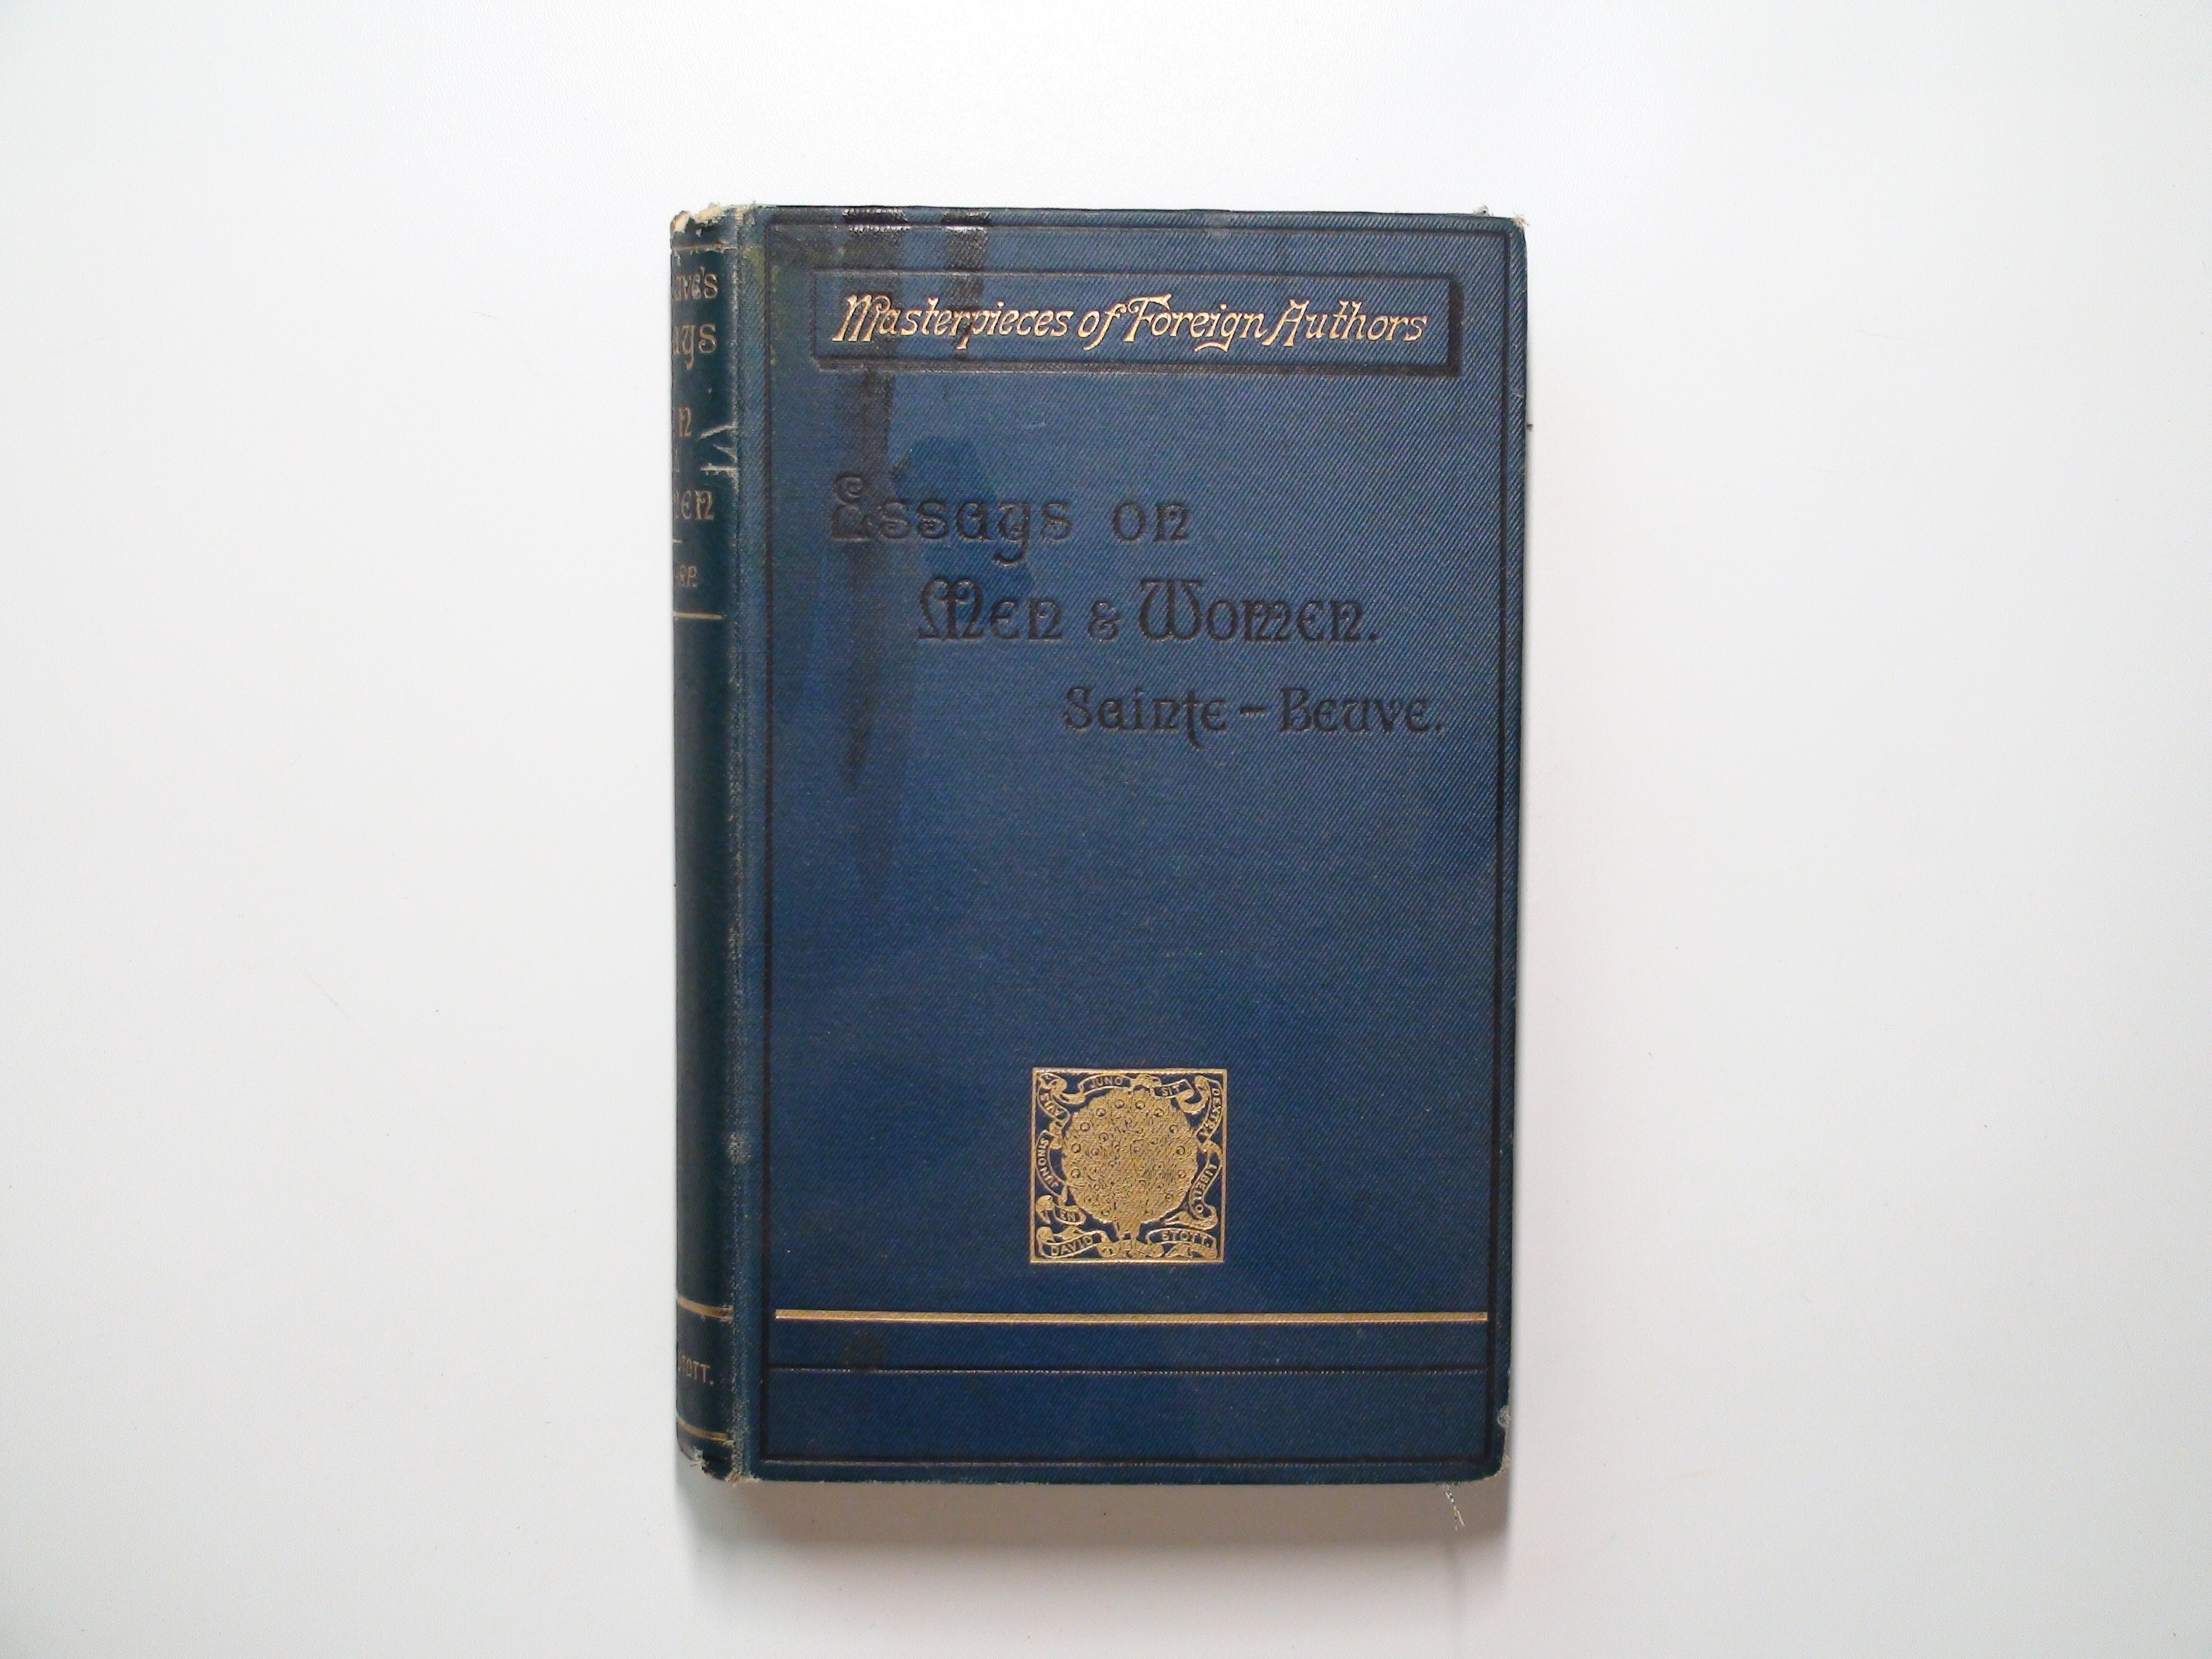 Essays on Men and Women by C. A. Sainte-Beuve, by William Sharp, 1st Ed, 1890